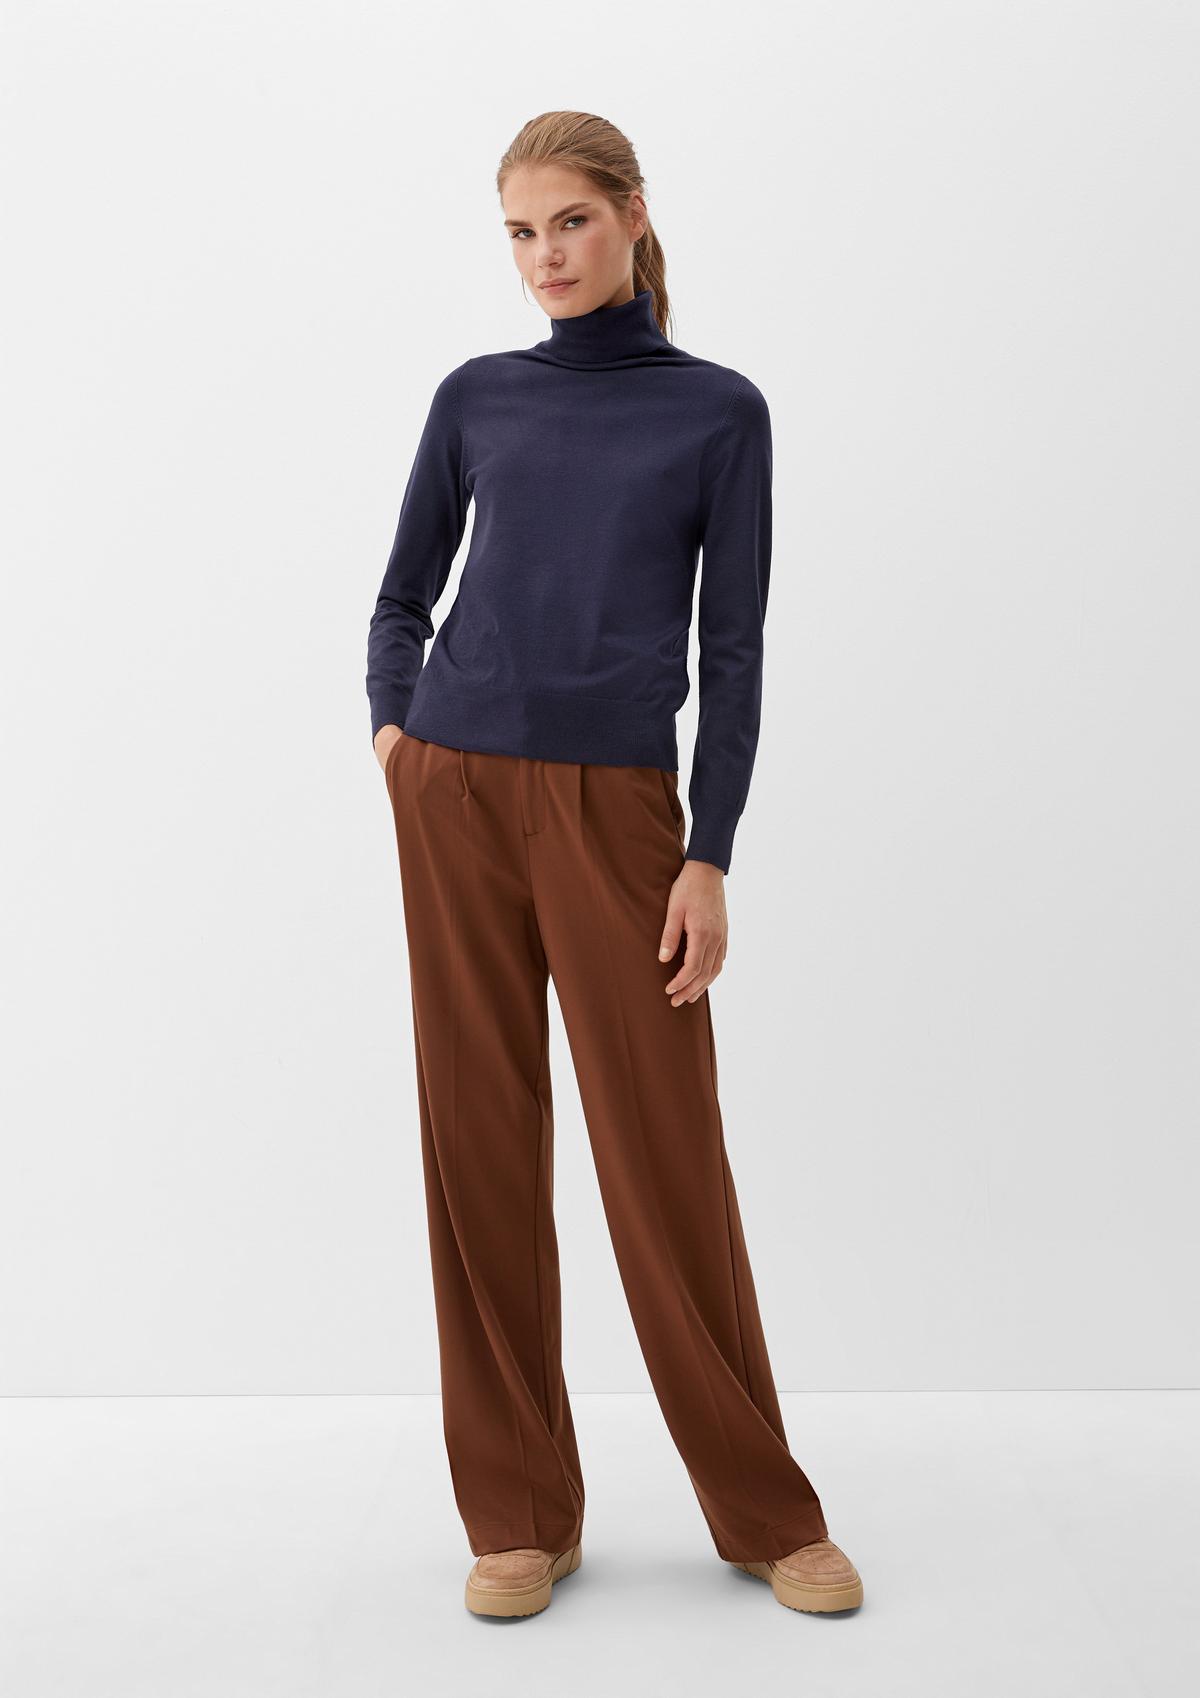 s.Oliver Fine knit jumper with a polo neck